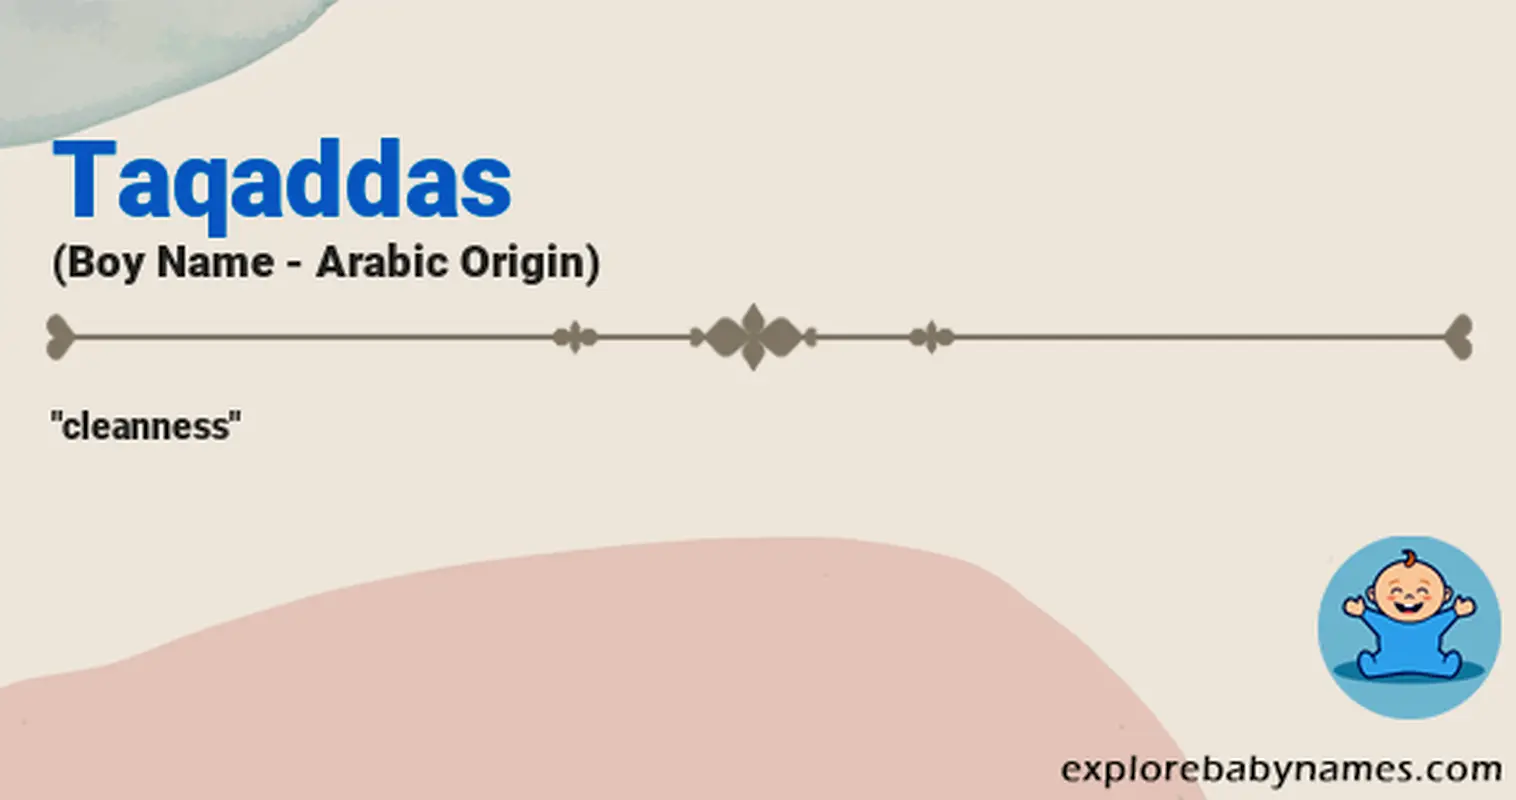 Meaning of Taqaddas